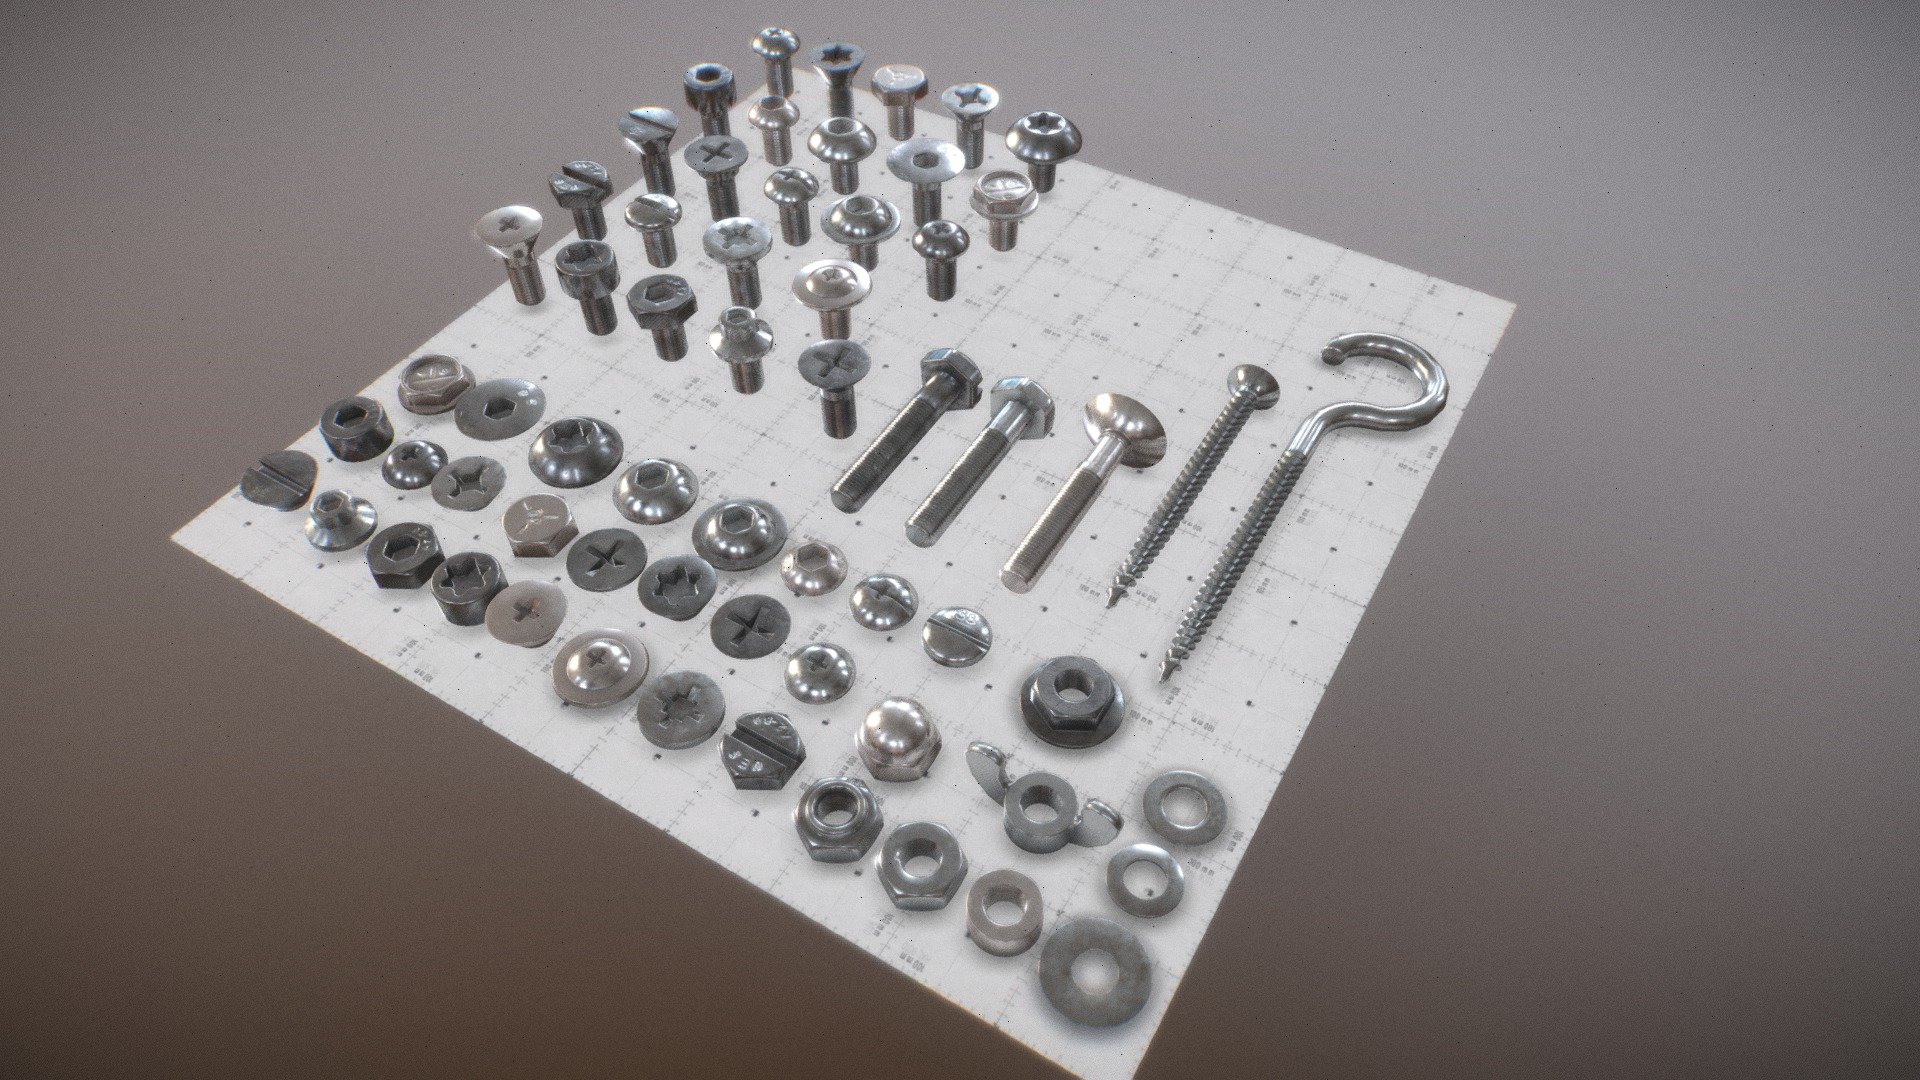 Nuts, Screws and Bolts pack. Introducing collection of meticulously crafted screws and nuts models, designed to elevate the realism of your scenes with intricate detailing. Ideal for close-ups and further shots, these models are subdivision ready, ensuring seamless integration into your projects. Each component is optimized for effortless use across all 3D platforms and game engines, offering high-quality variants and textures in stunning 4K resolution. Additionally, the kit features a versatile kitbash option, empowering you to customize and assemble your own unique models. As a bonus, we provide two rust textures along with instructions on leveraging them to create dynamic weathering effects using Blender's ambient occlusion feature (or its equivalent in other software). Save yourself the tedium of modeling them from scratch; download these assets from our site and effortlessly enhance the detail and realism of your scenes 3d model